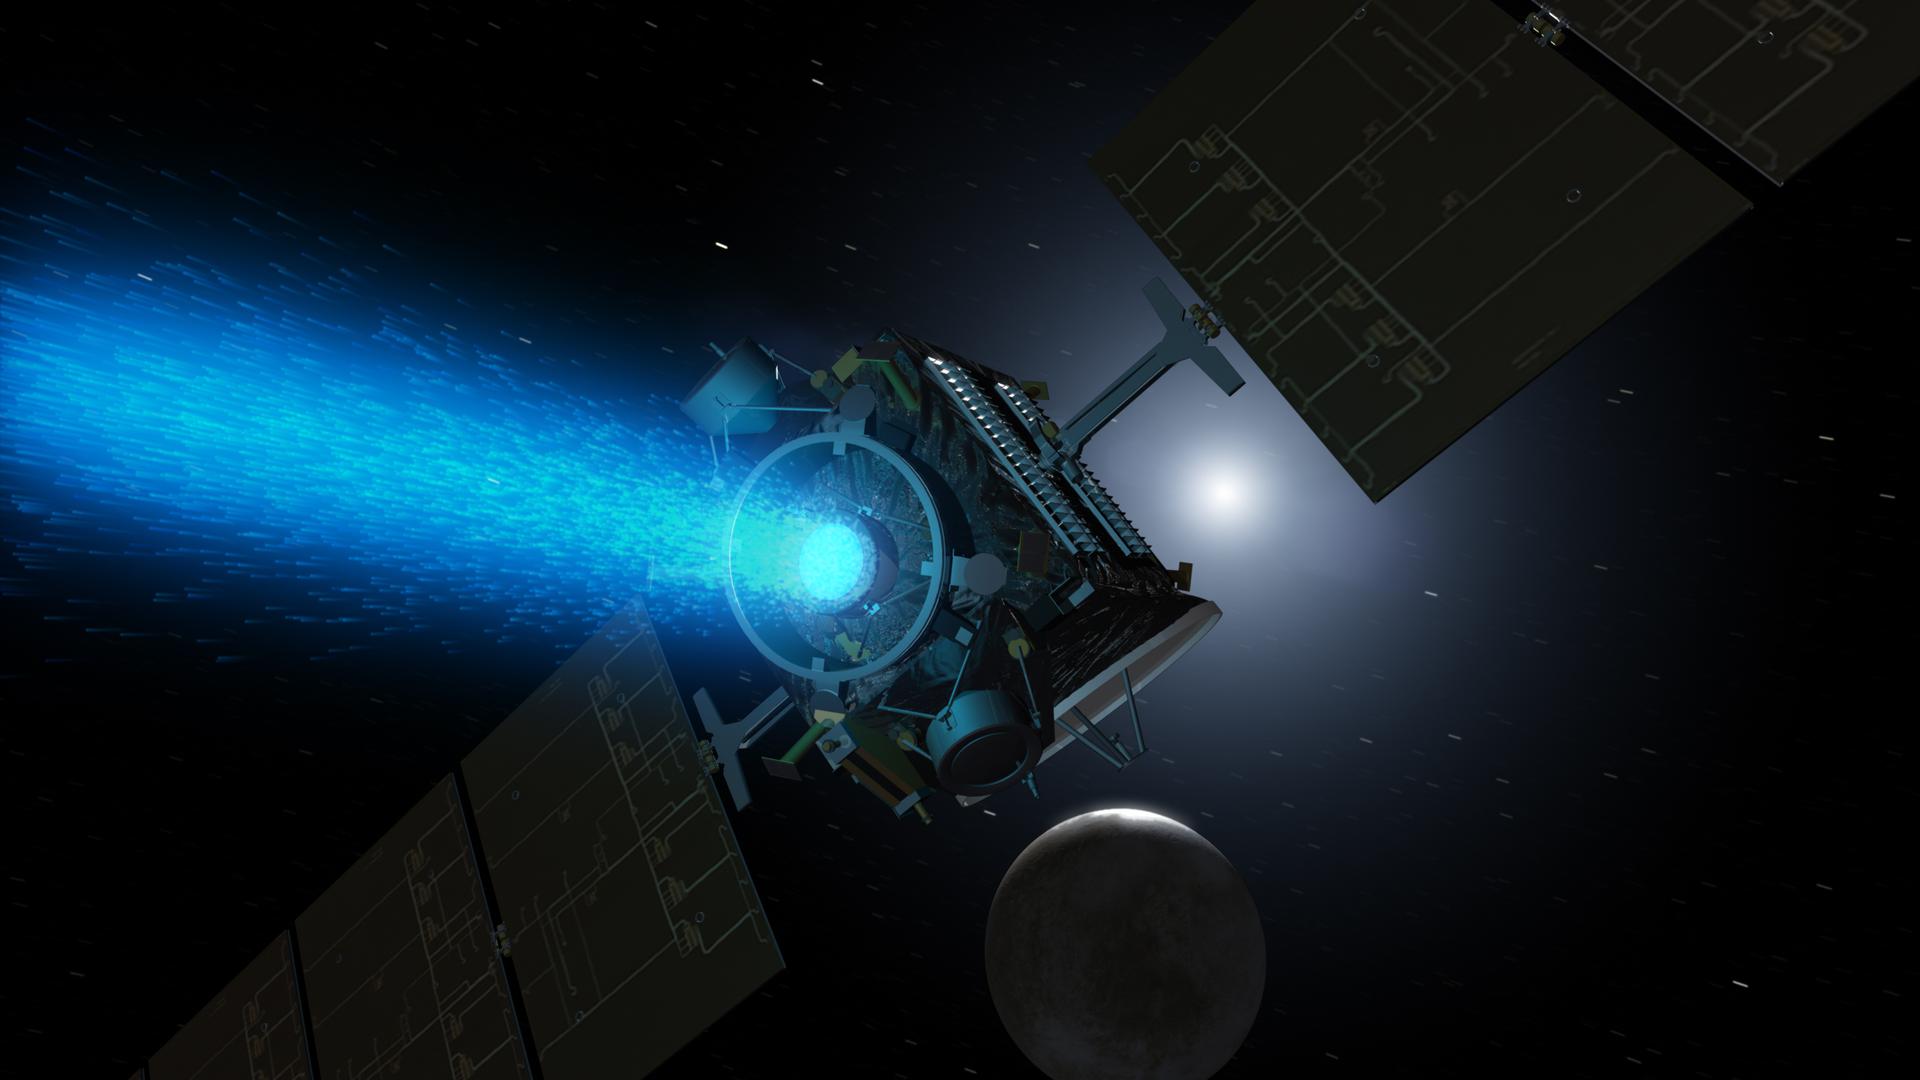 This artist's concept shows NASA's Dawn spacecraft arriving at the dwarf planet Ceres